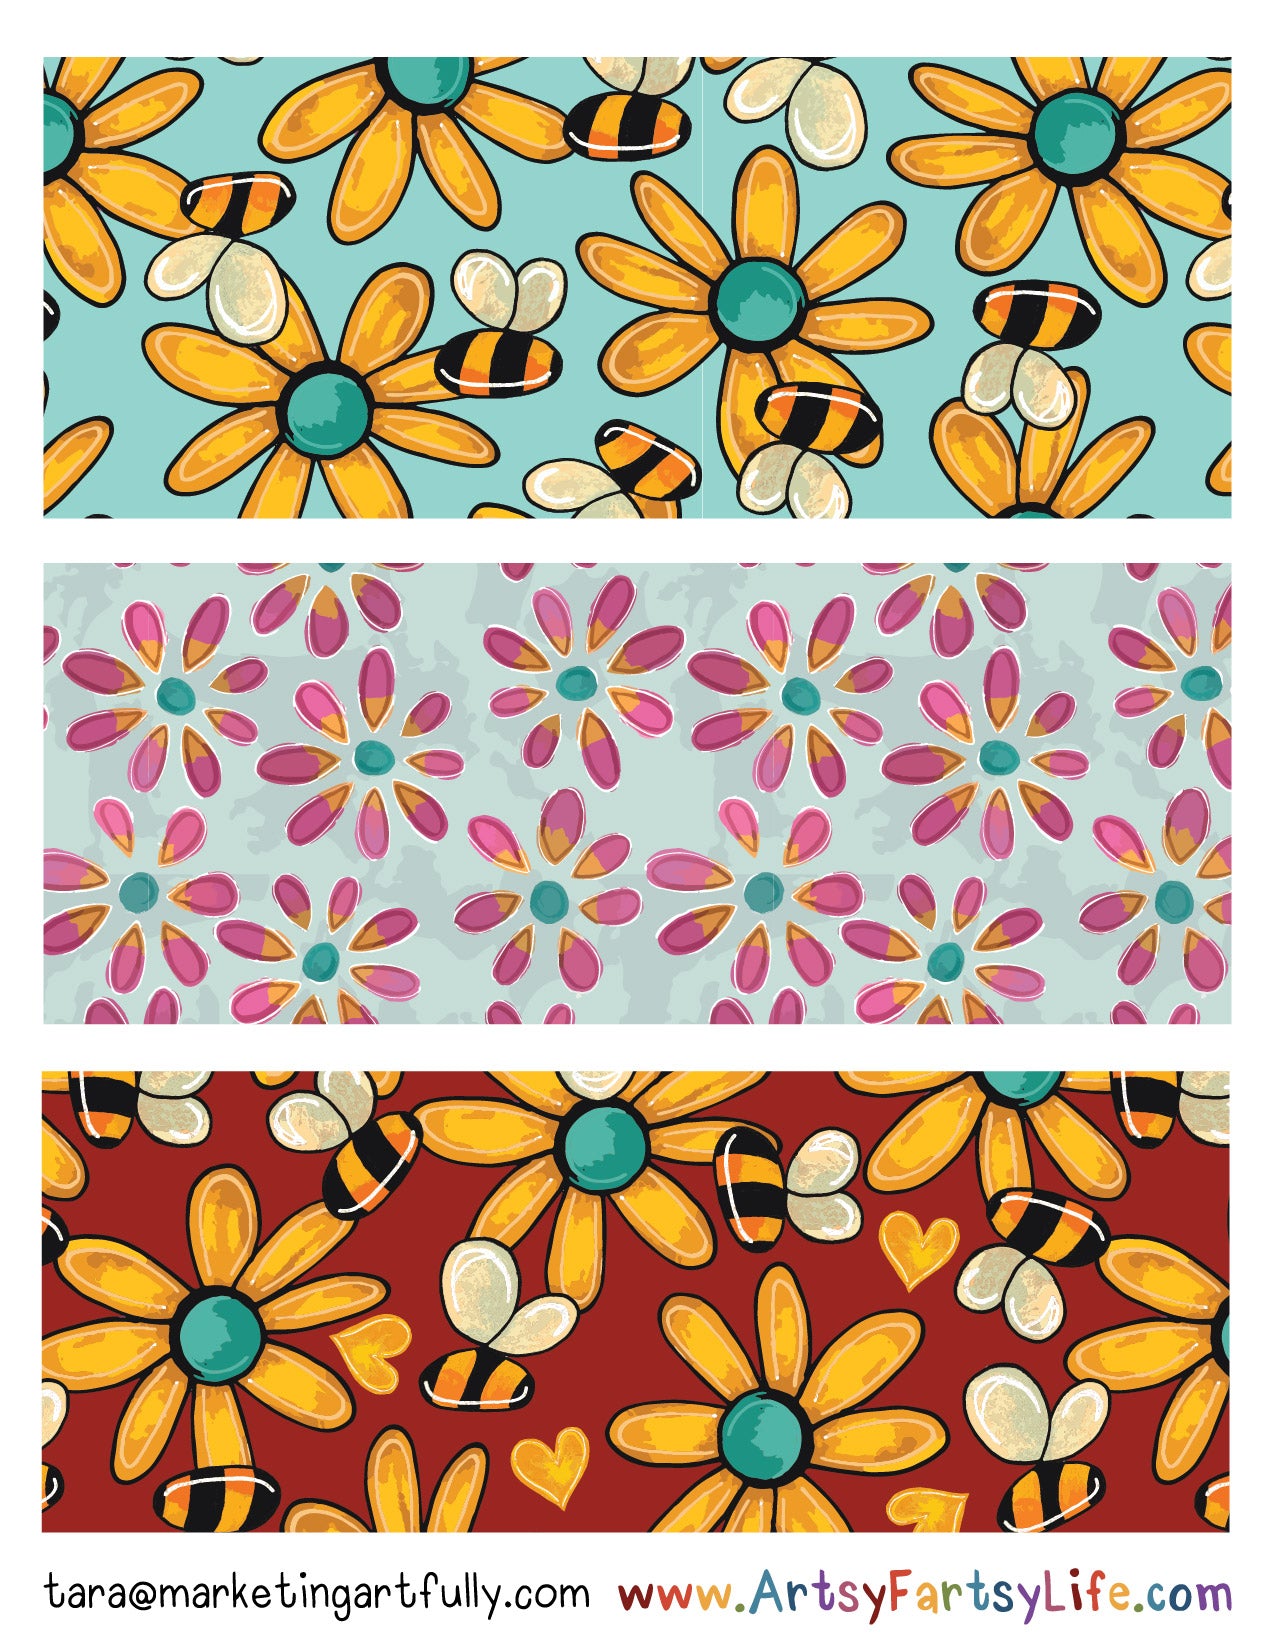 Lady Bee Bear Surface Design for Wall Art